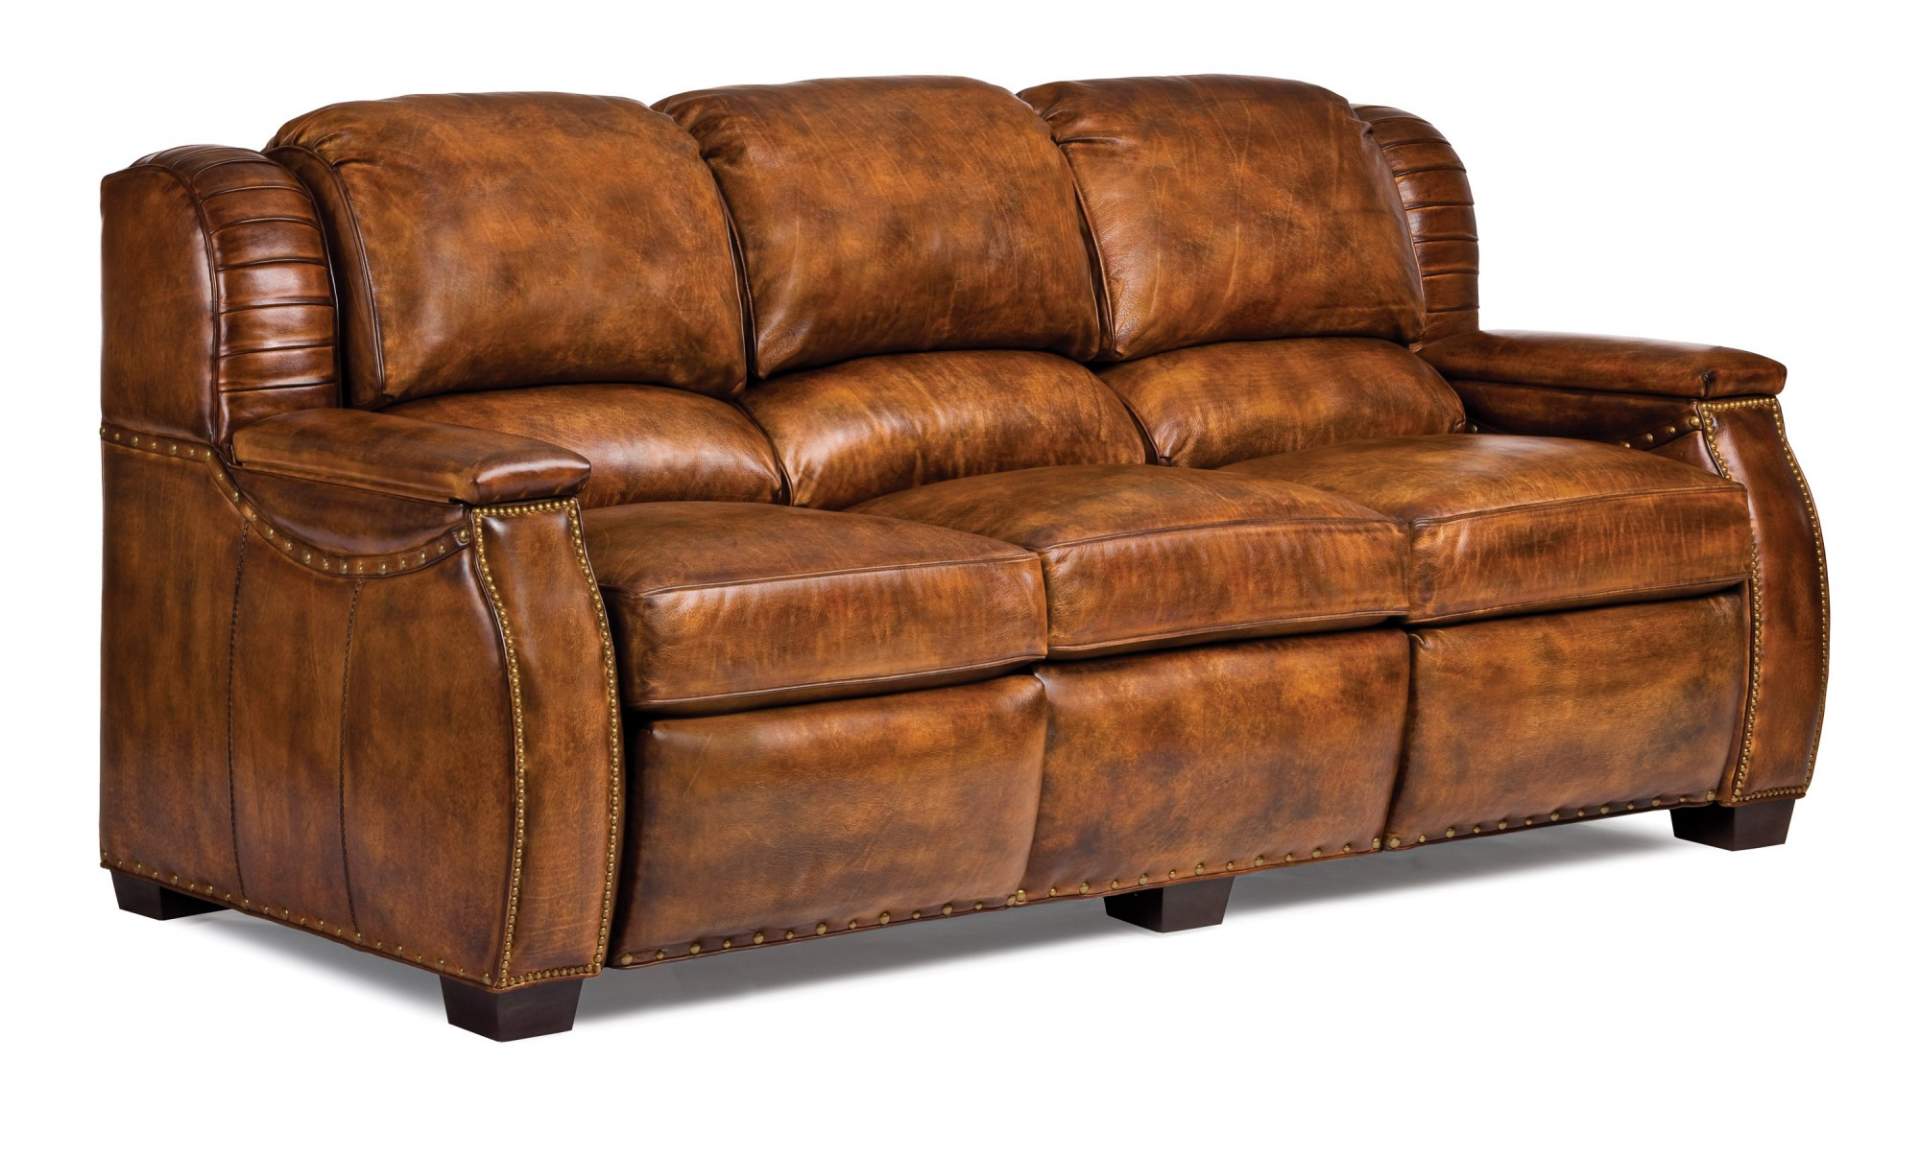 American Reclining Sofa, Leather Reclining Couch